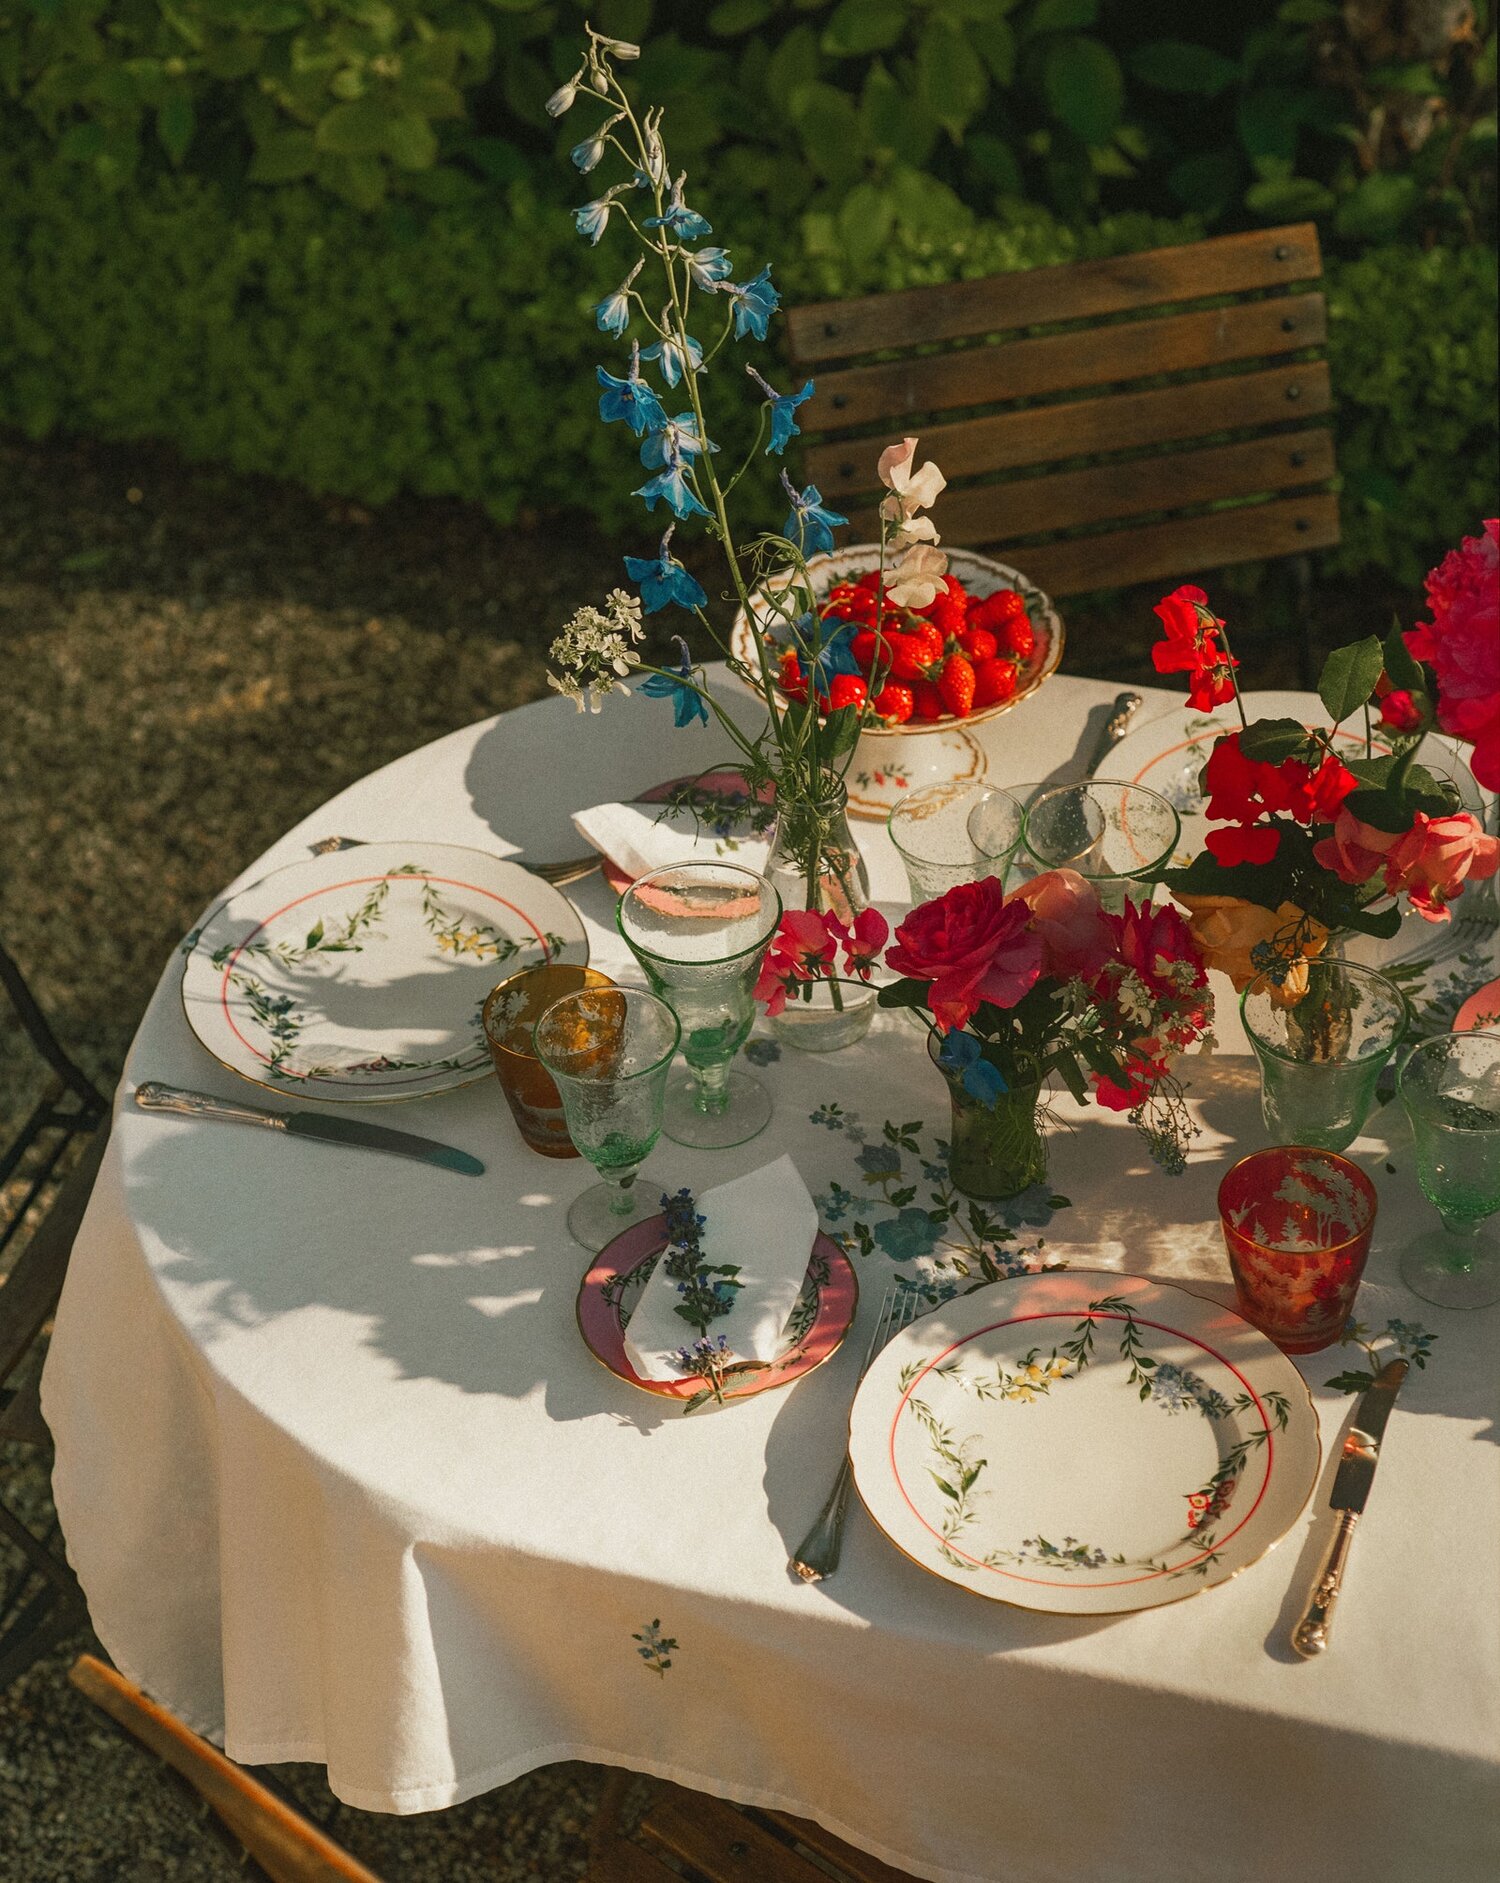 The table is set with fine linens, flowers, and china